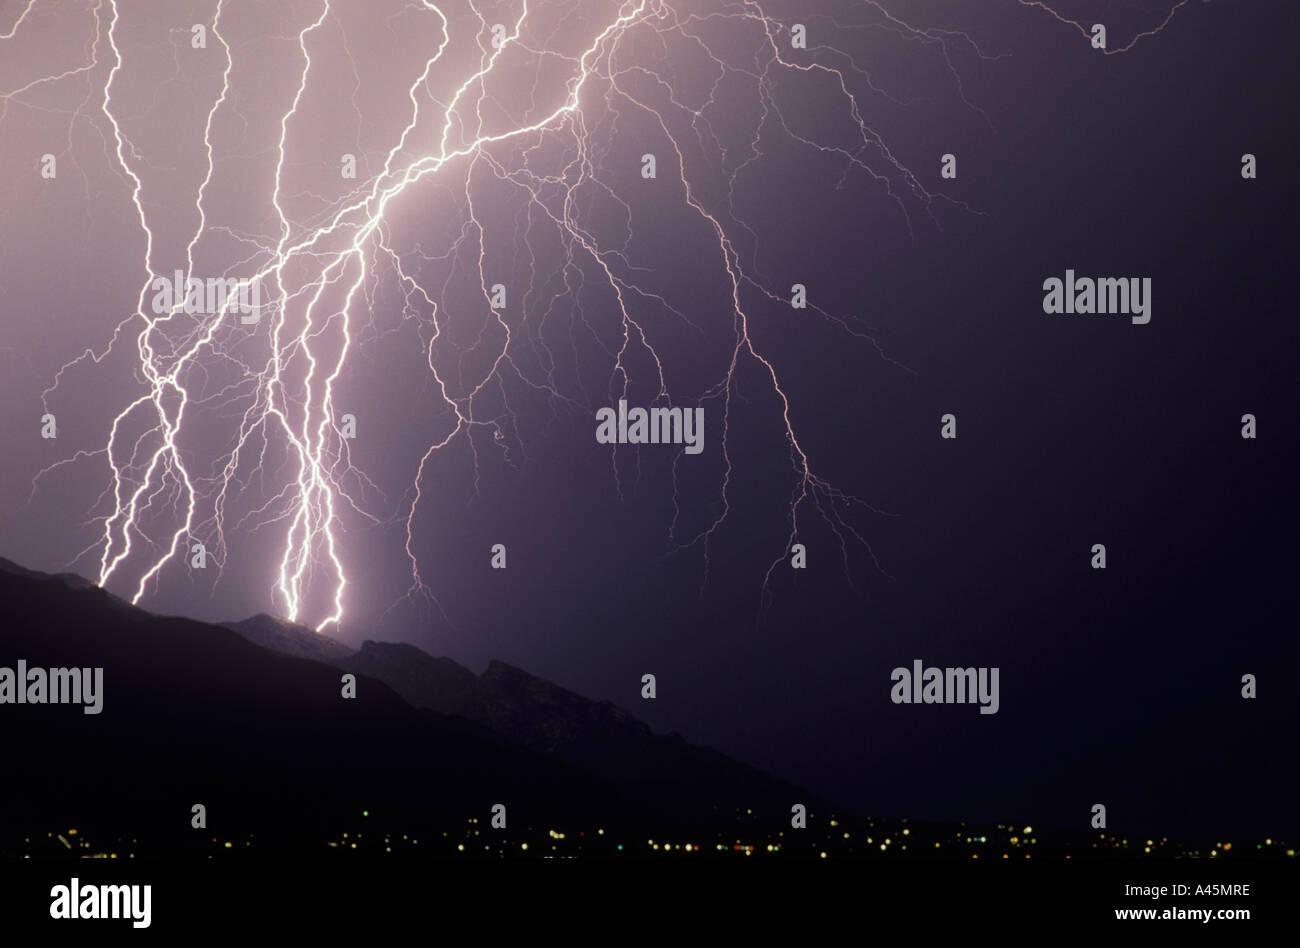 Bolts of lightning strikefrom a stormy sky over a mountain range and city lights in Southern Arizona, USA. Stock Photo